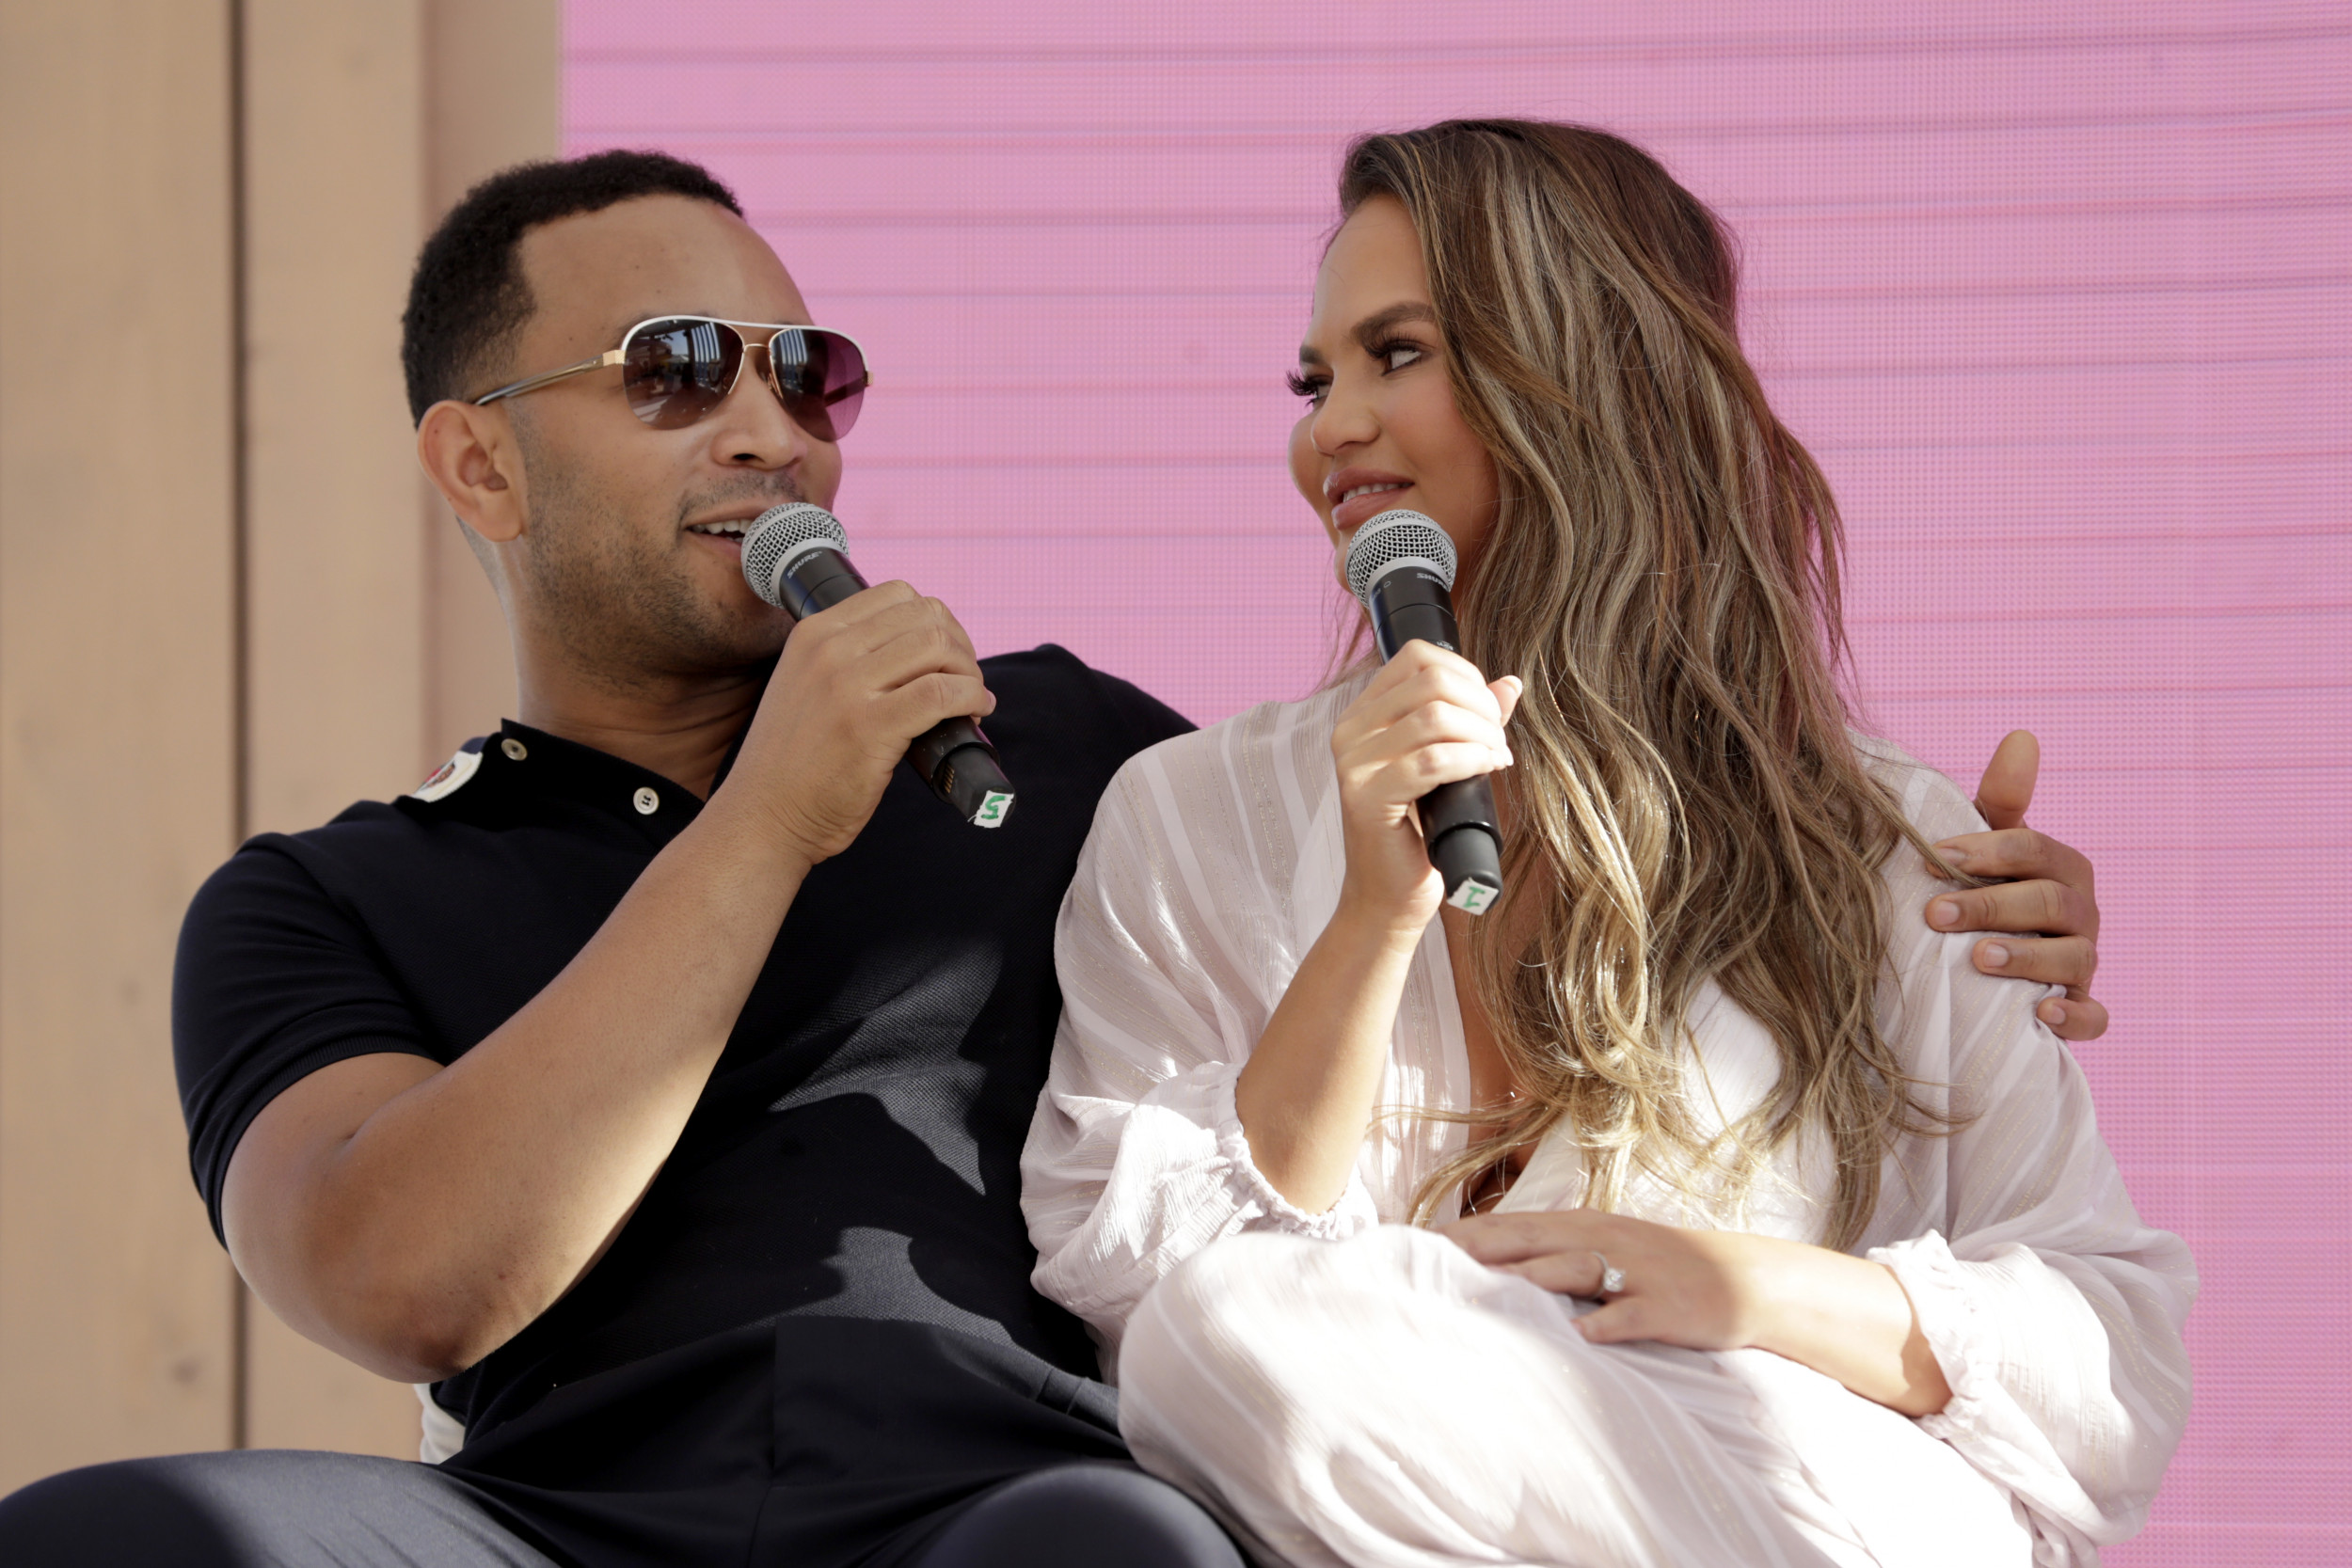 What Chrissy Teigen and John Legend Have Said About Losing Baby After Pregnancy Complications